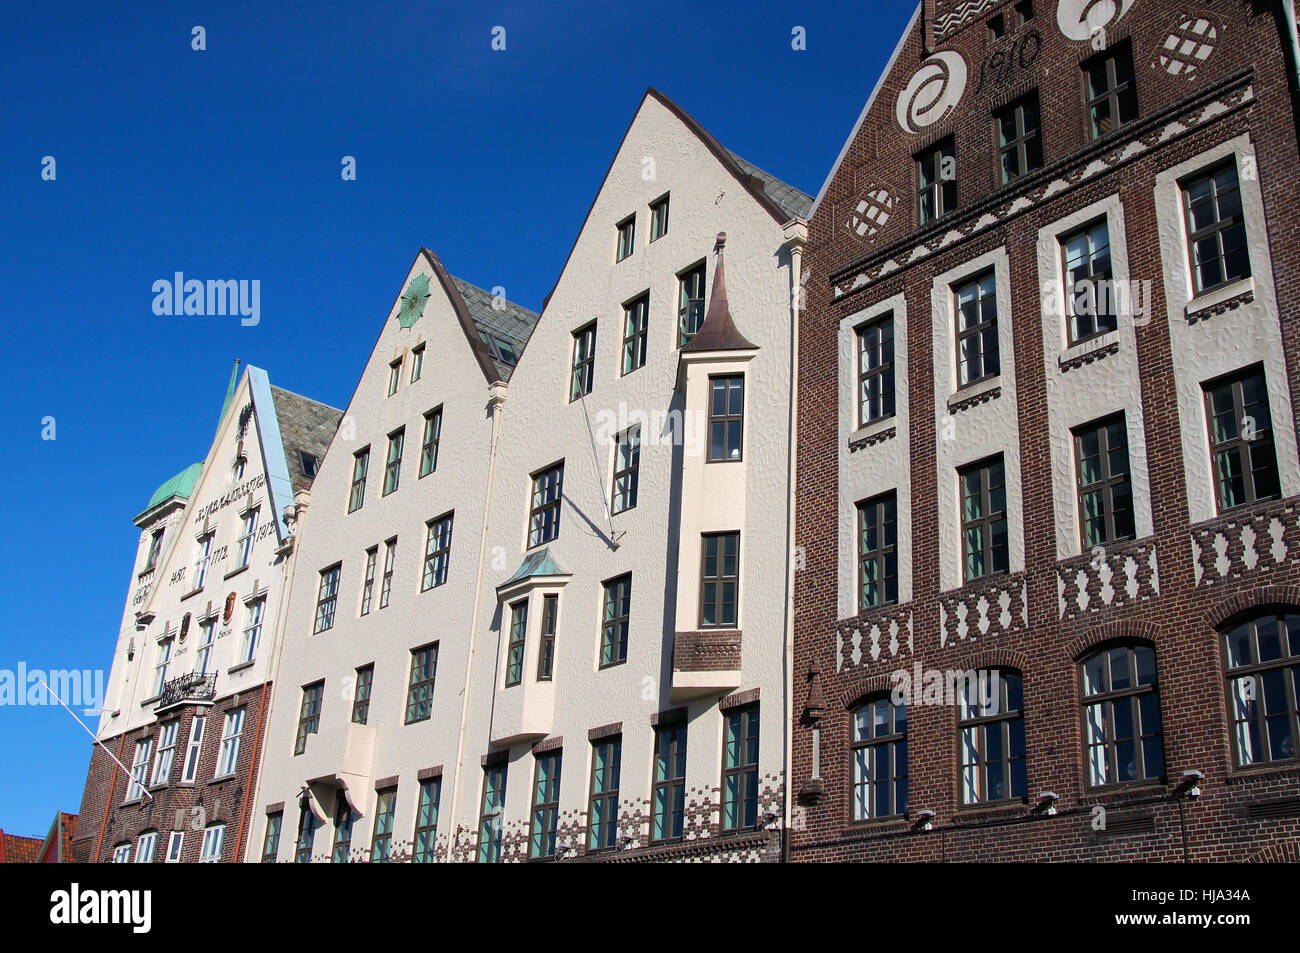 house, building, historical, norway, facade, salvage, brick, blue, house, Stock Photo